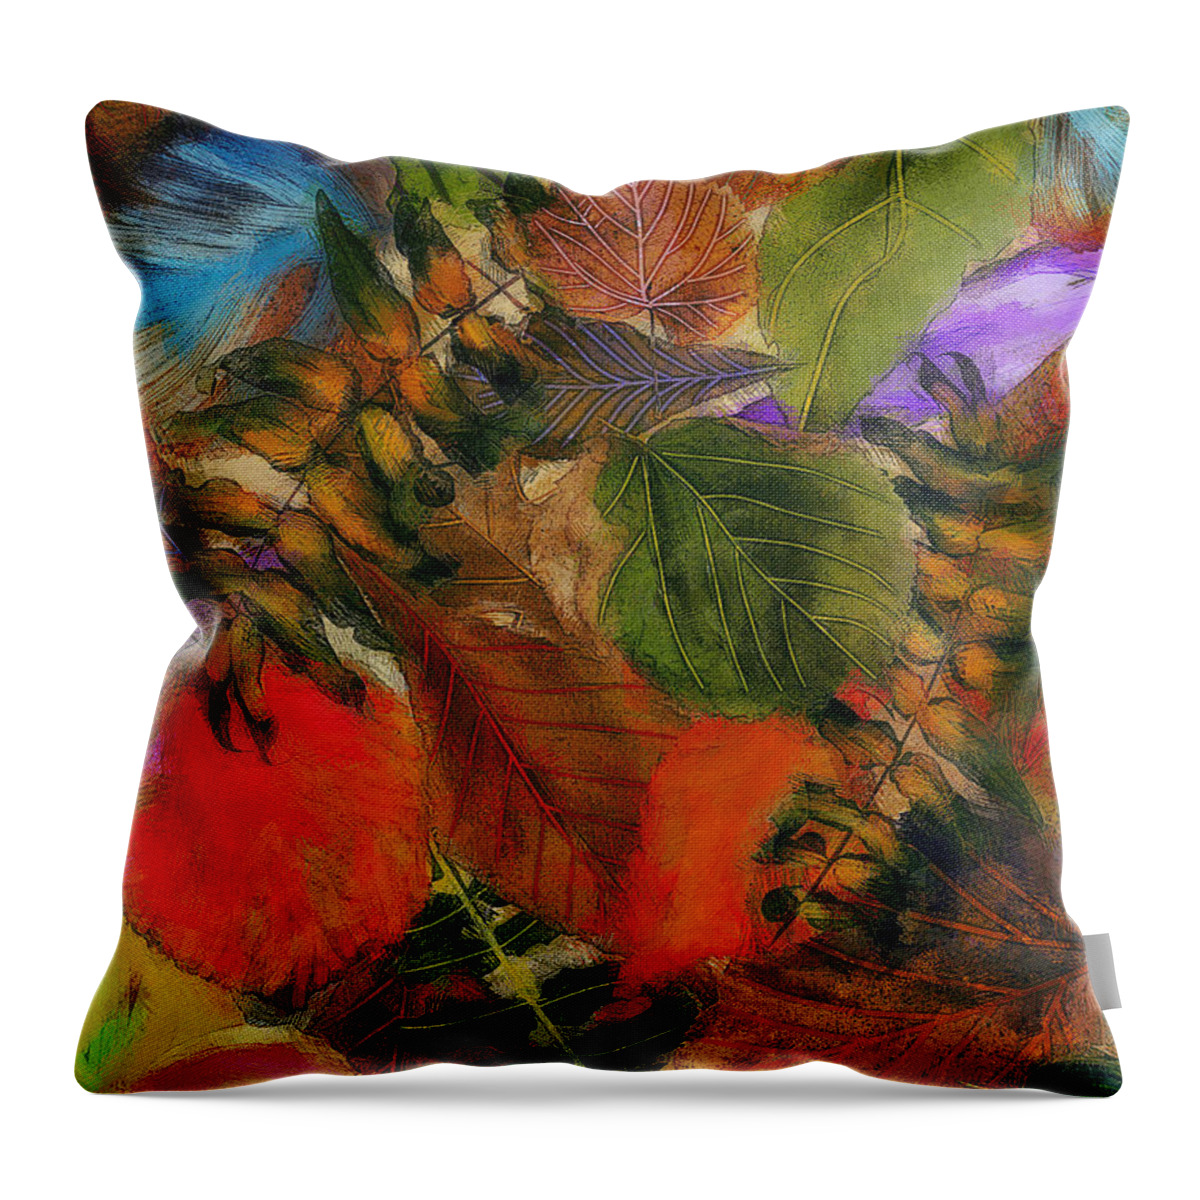 Season Changing Throw Pillow featuring the digital art Autumn Leaves by Klara Acel